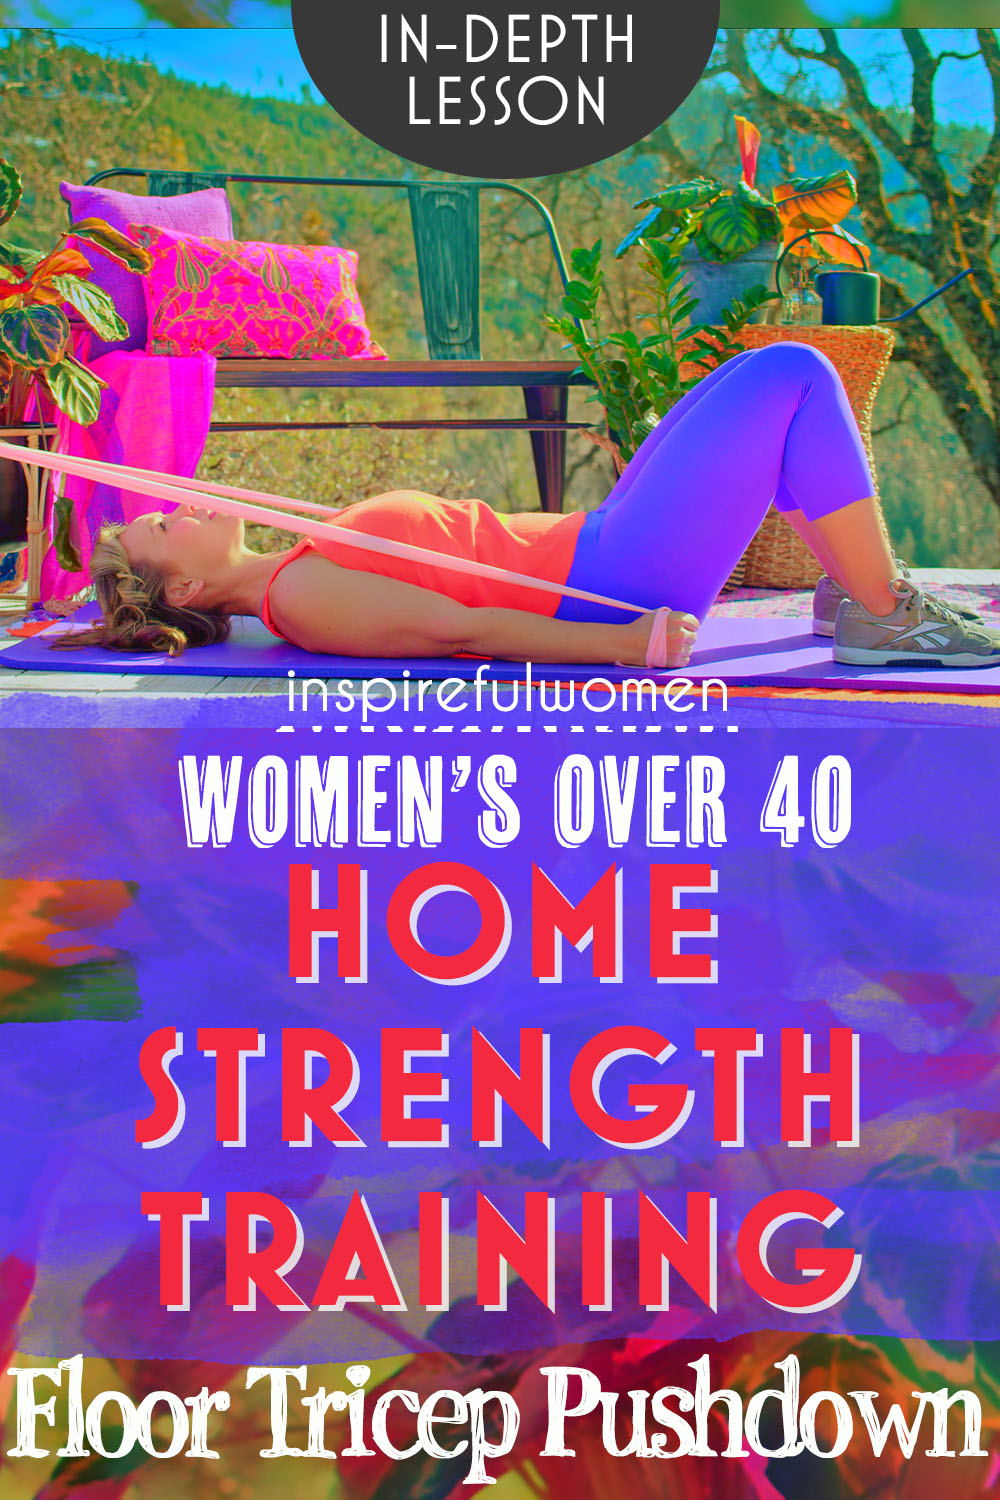 band-floor-lying-tricep-pushdown-alternative-home-under-arm-toning-exercise-women-40+